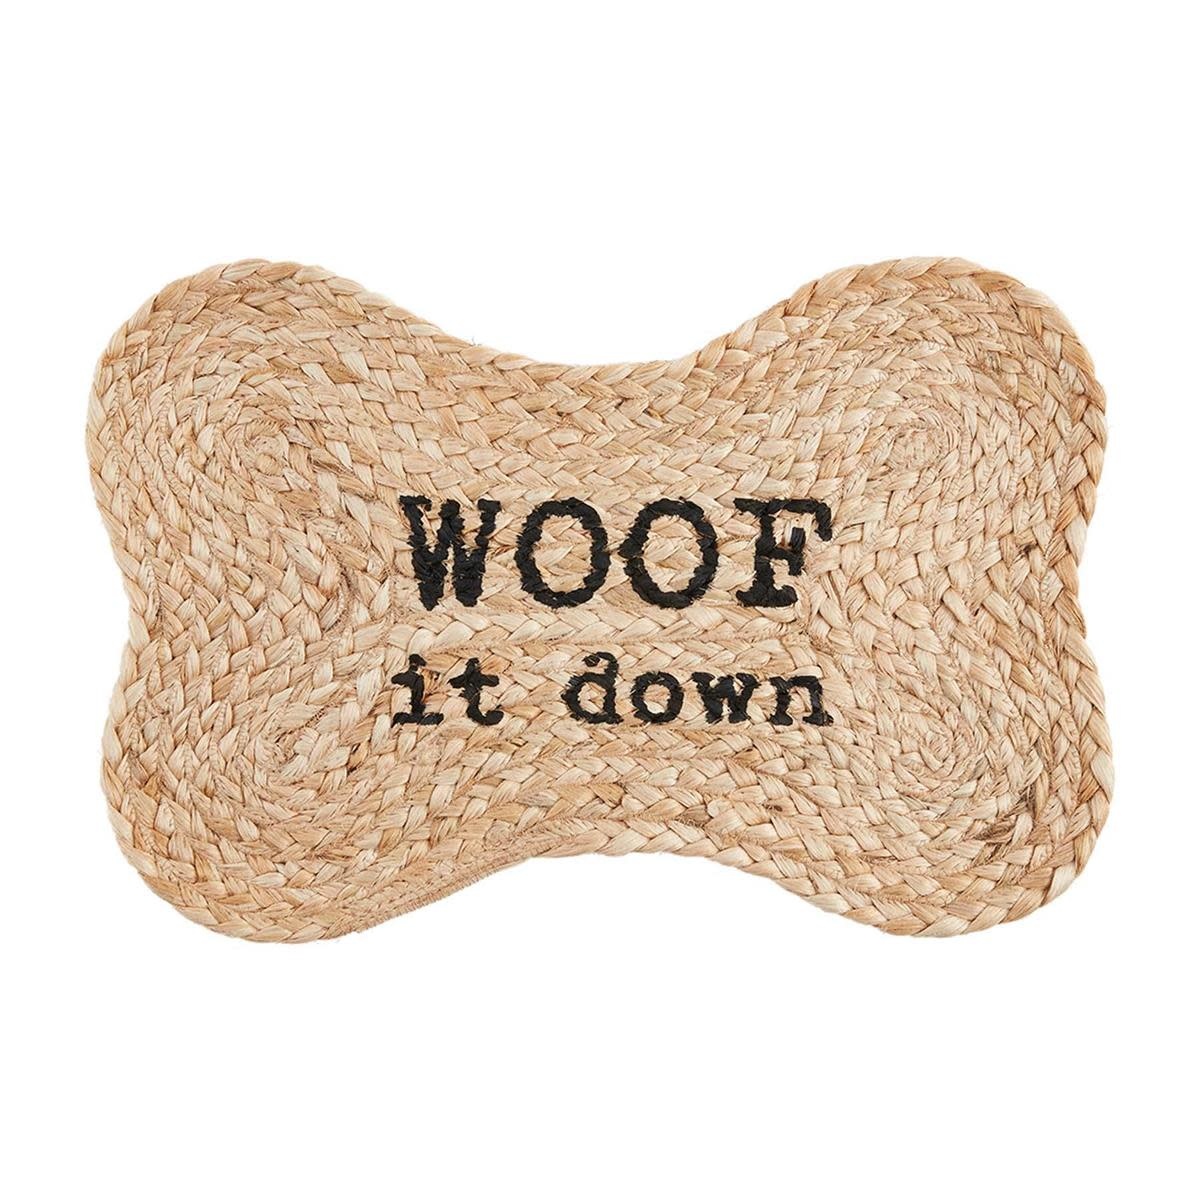 MUD PIE Dogs Welcome Paw Print Mat 